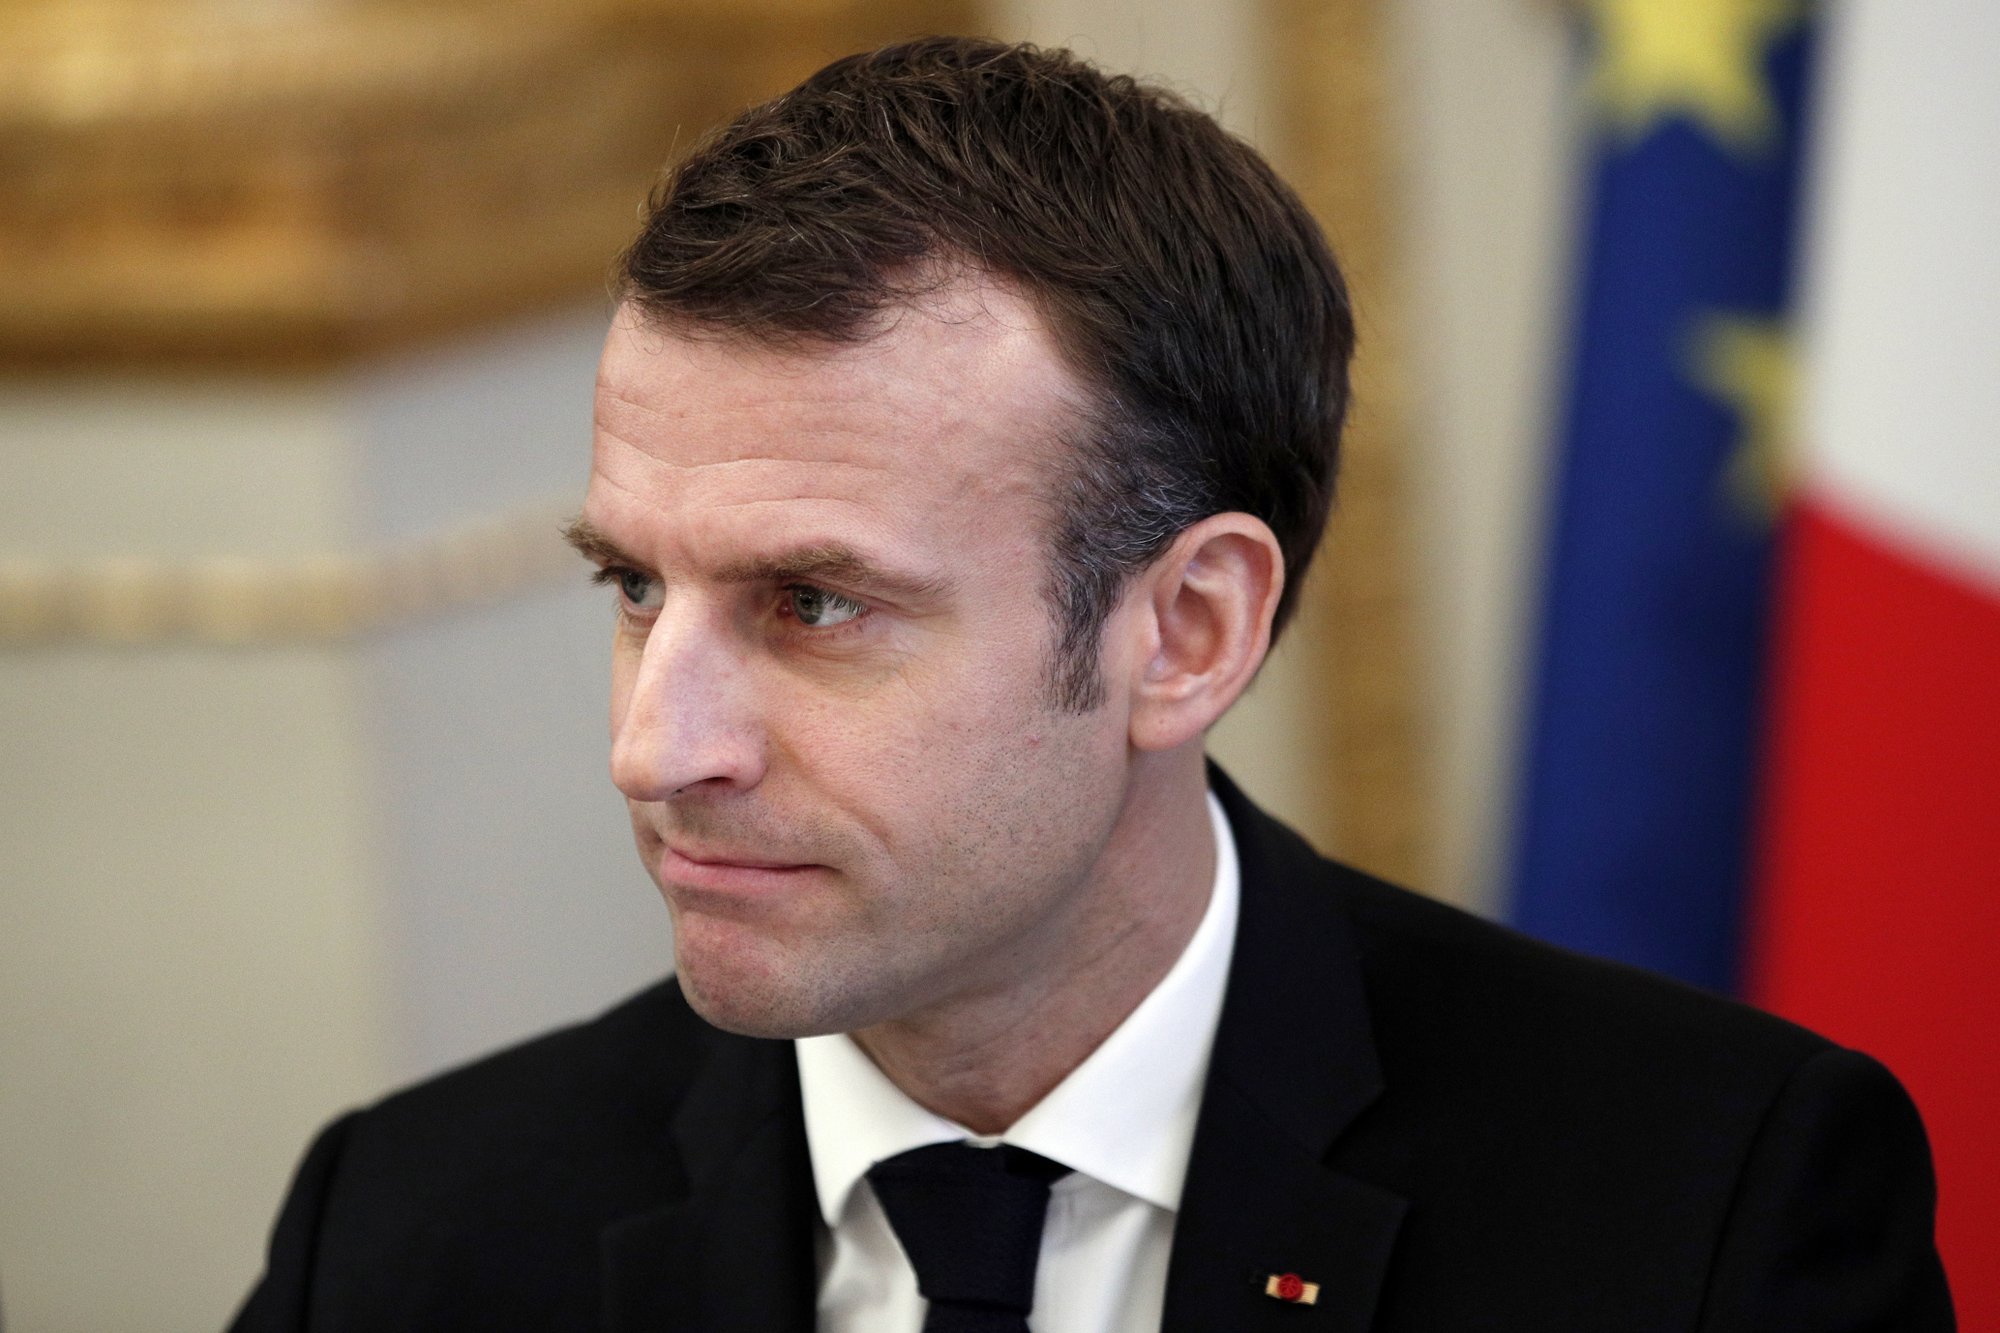 macron-vows-tax-relief-urges-calm-in-bid-to-quell-protests-news-1130